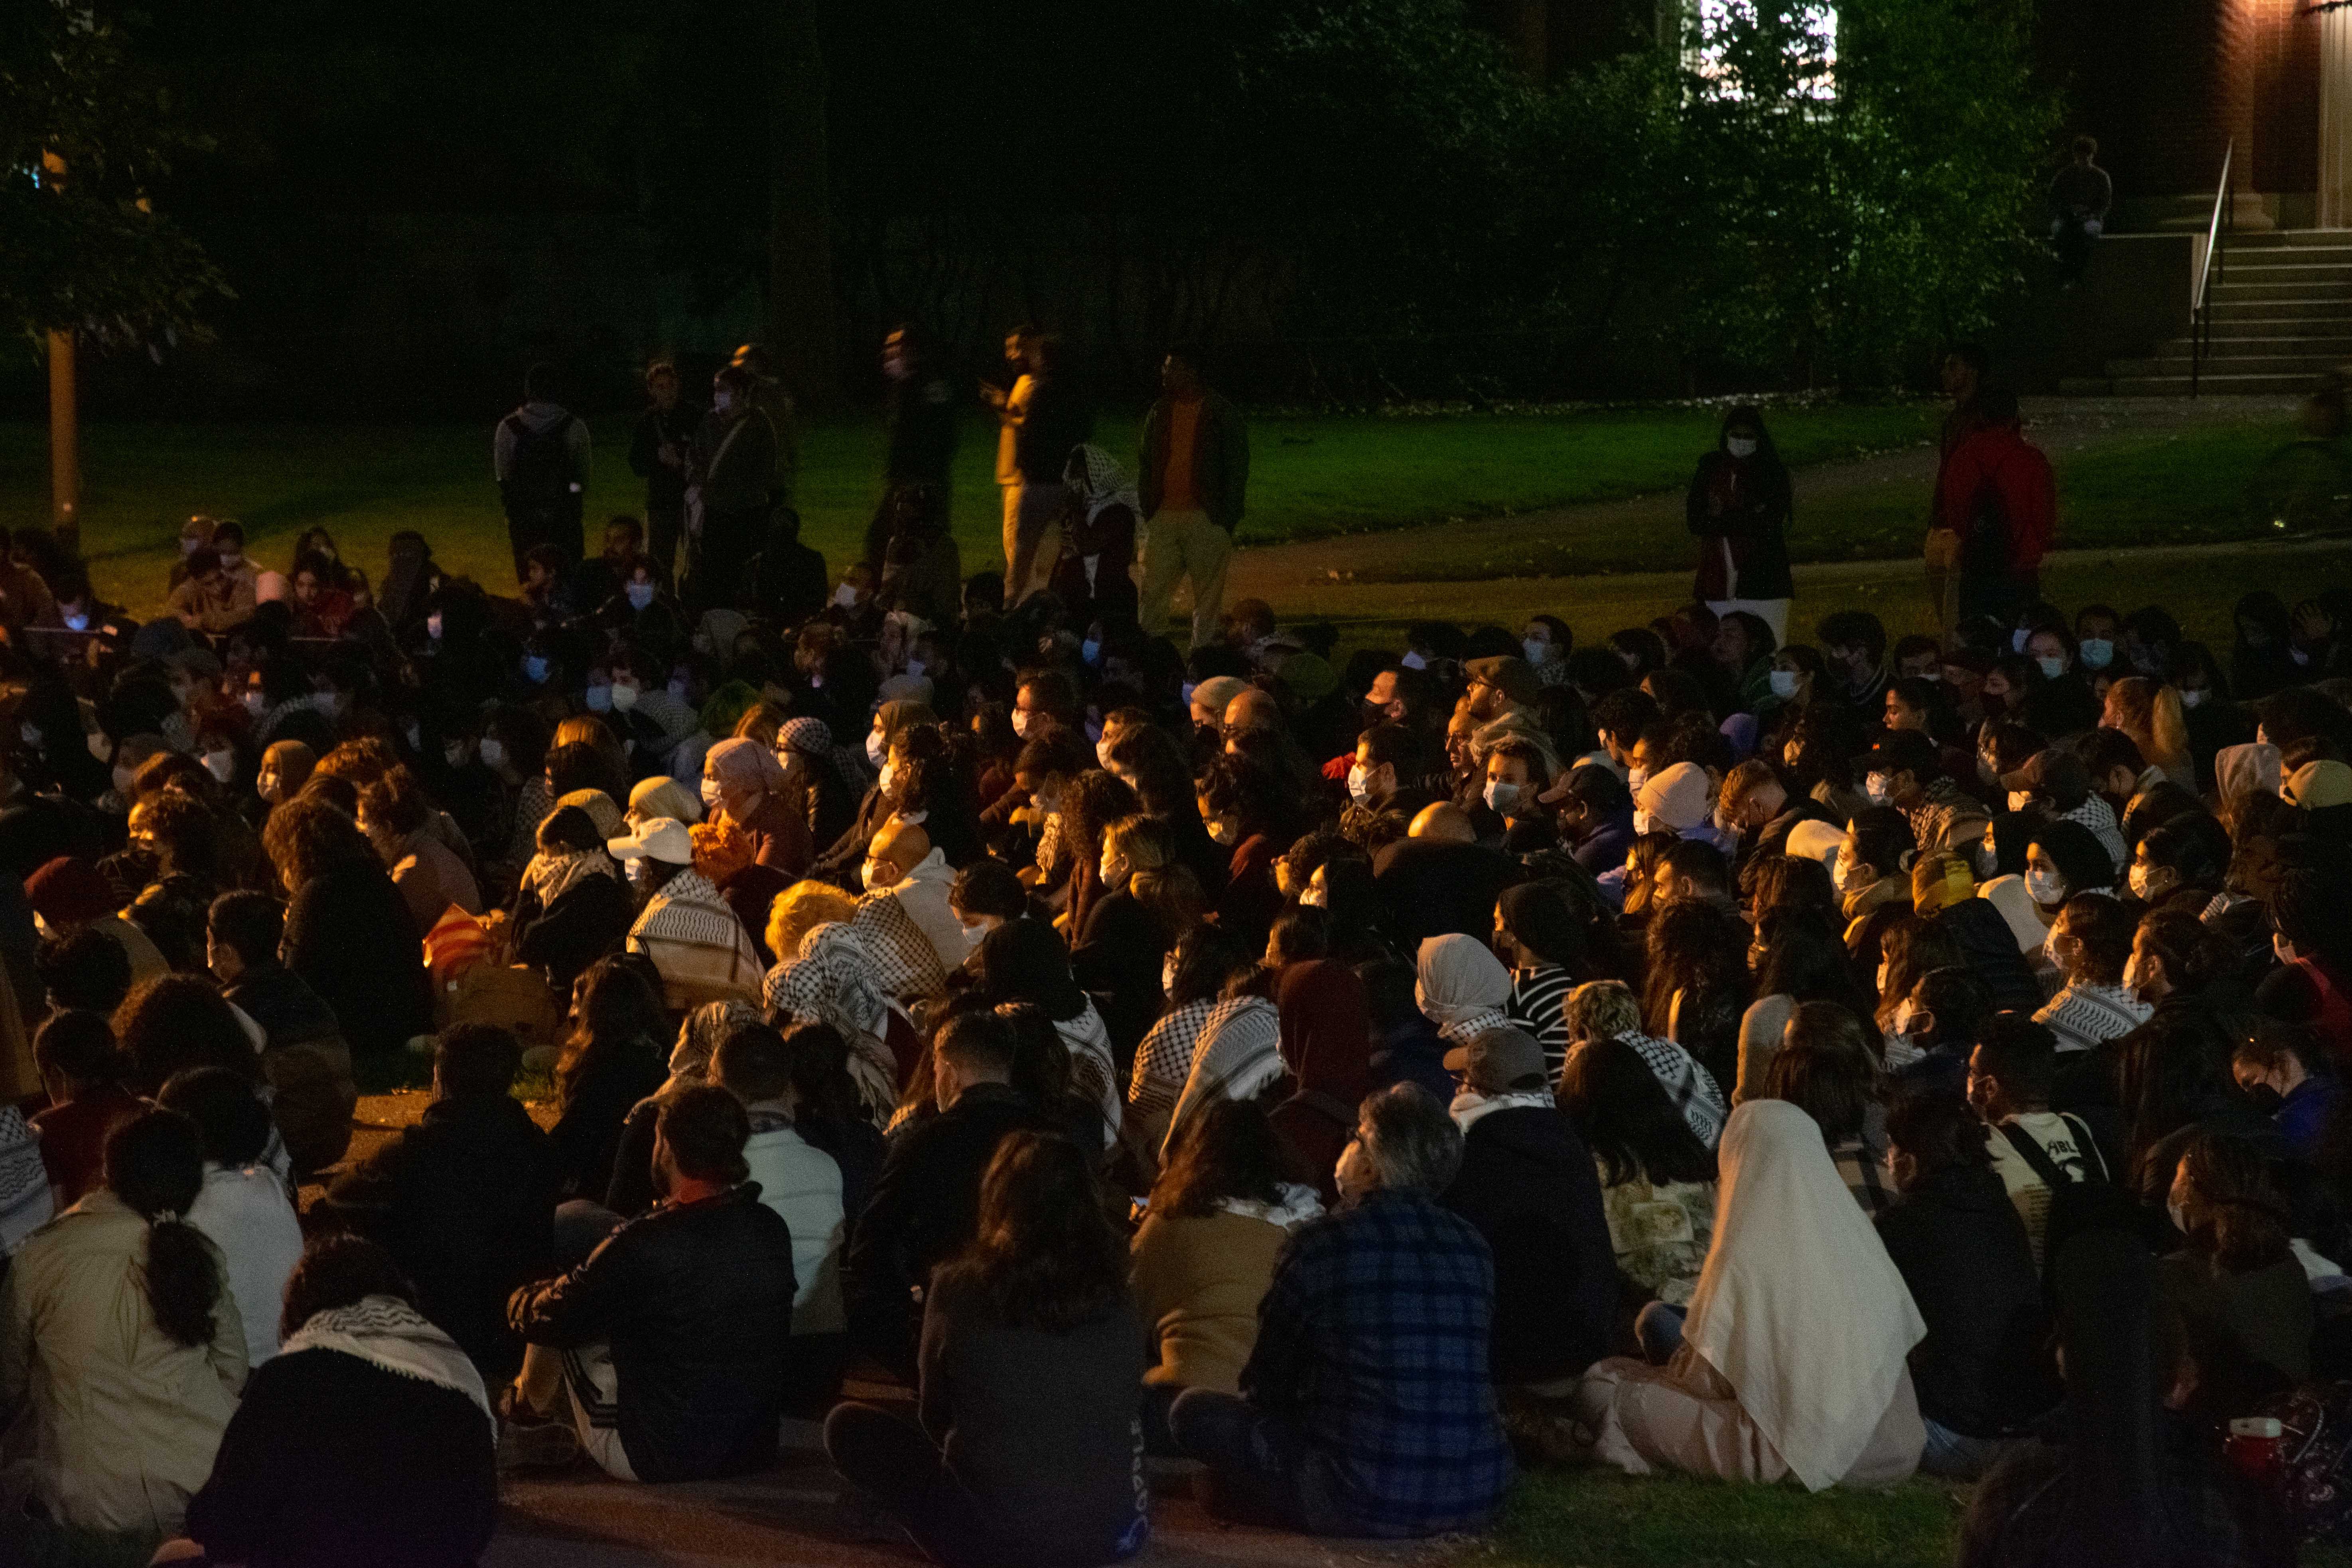 Hundreds of Harvard students and affiliates gather in the Sever Quadrangle for a silent vigil to mourn civilian deaths in Gaza and Israel and stand in solidarity with Palestine.